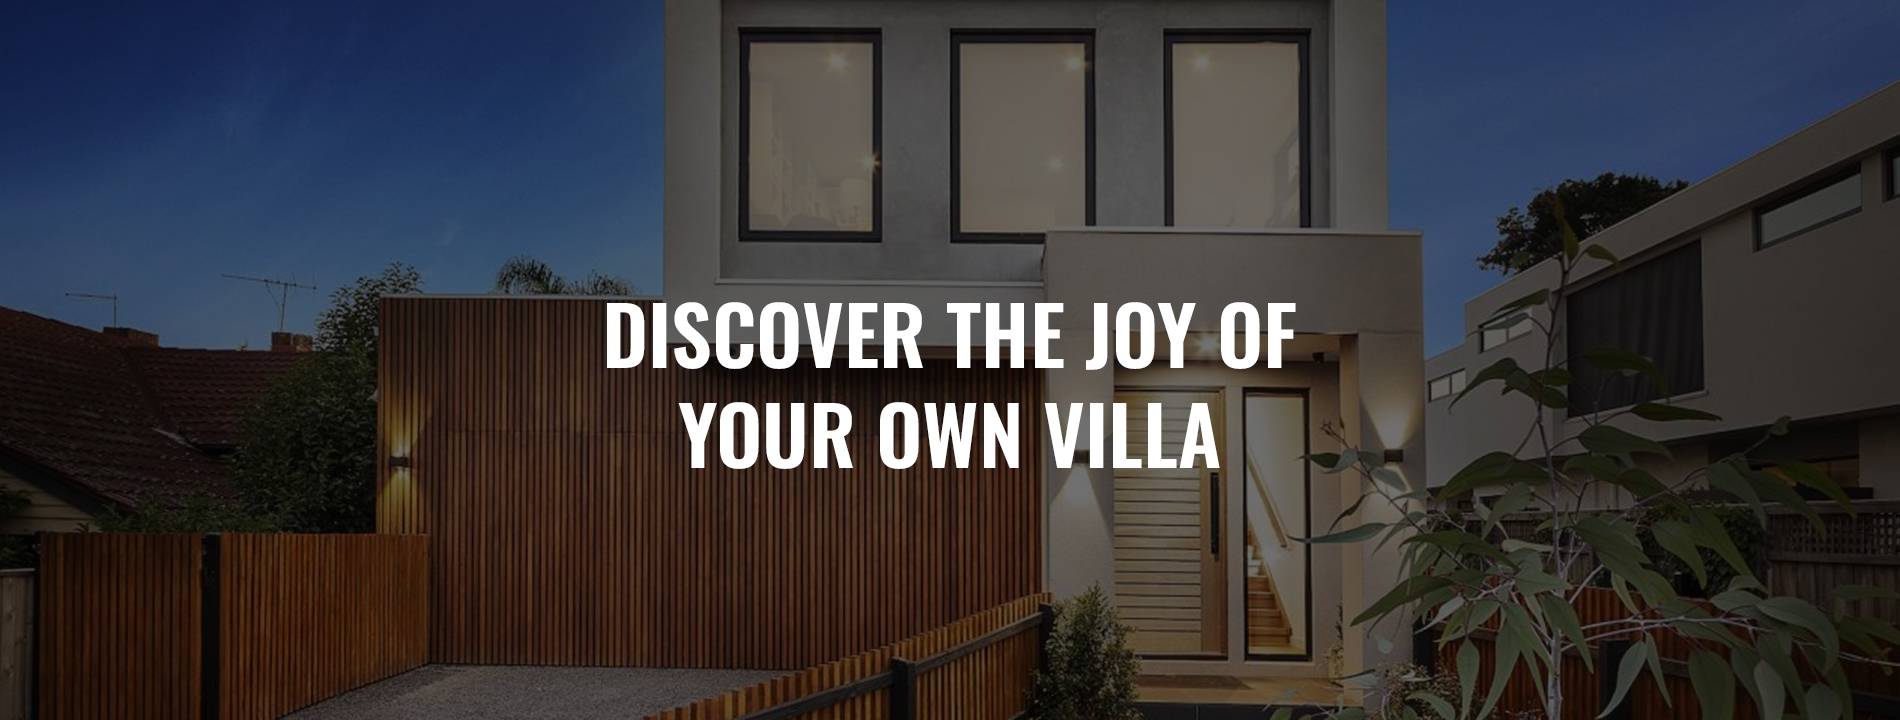 Discover the joy of your own villa